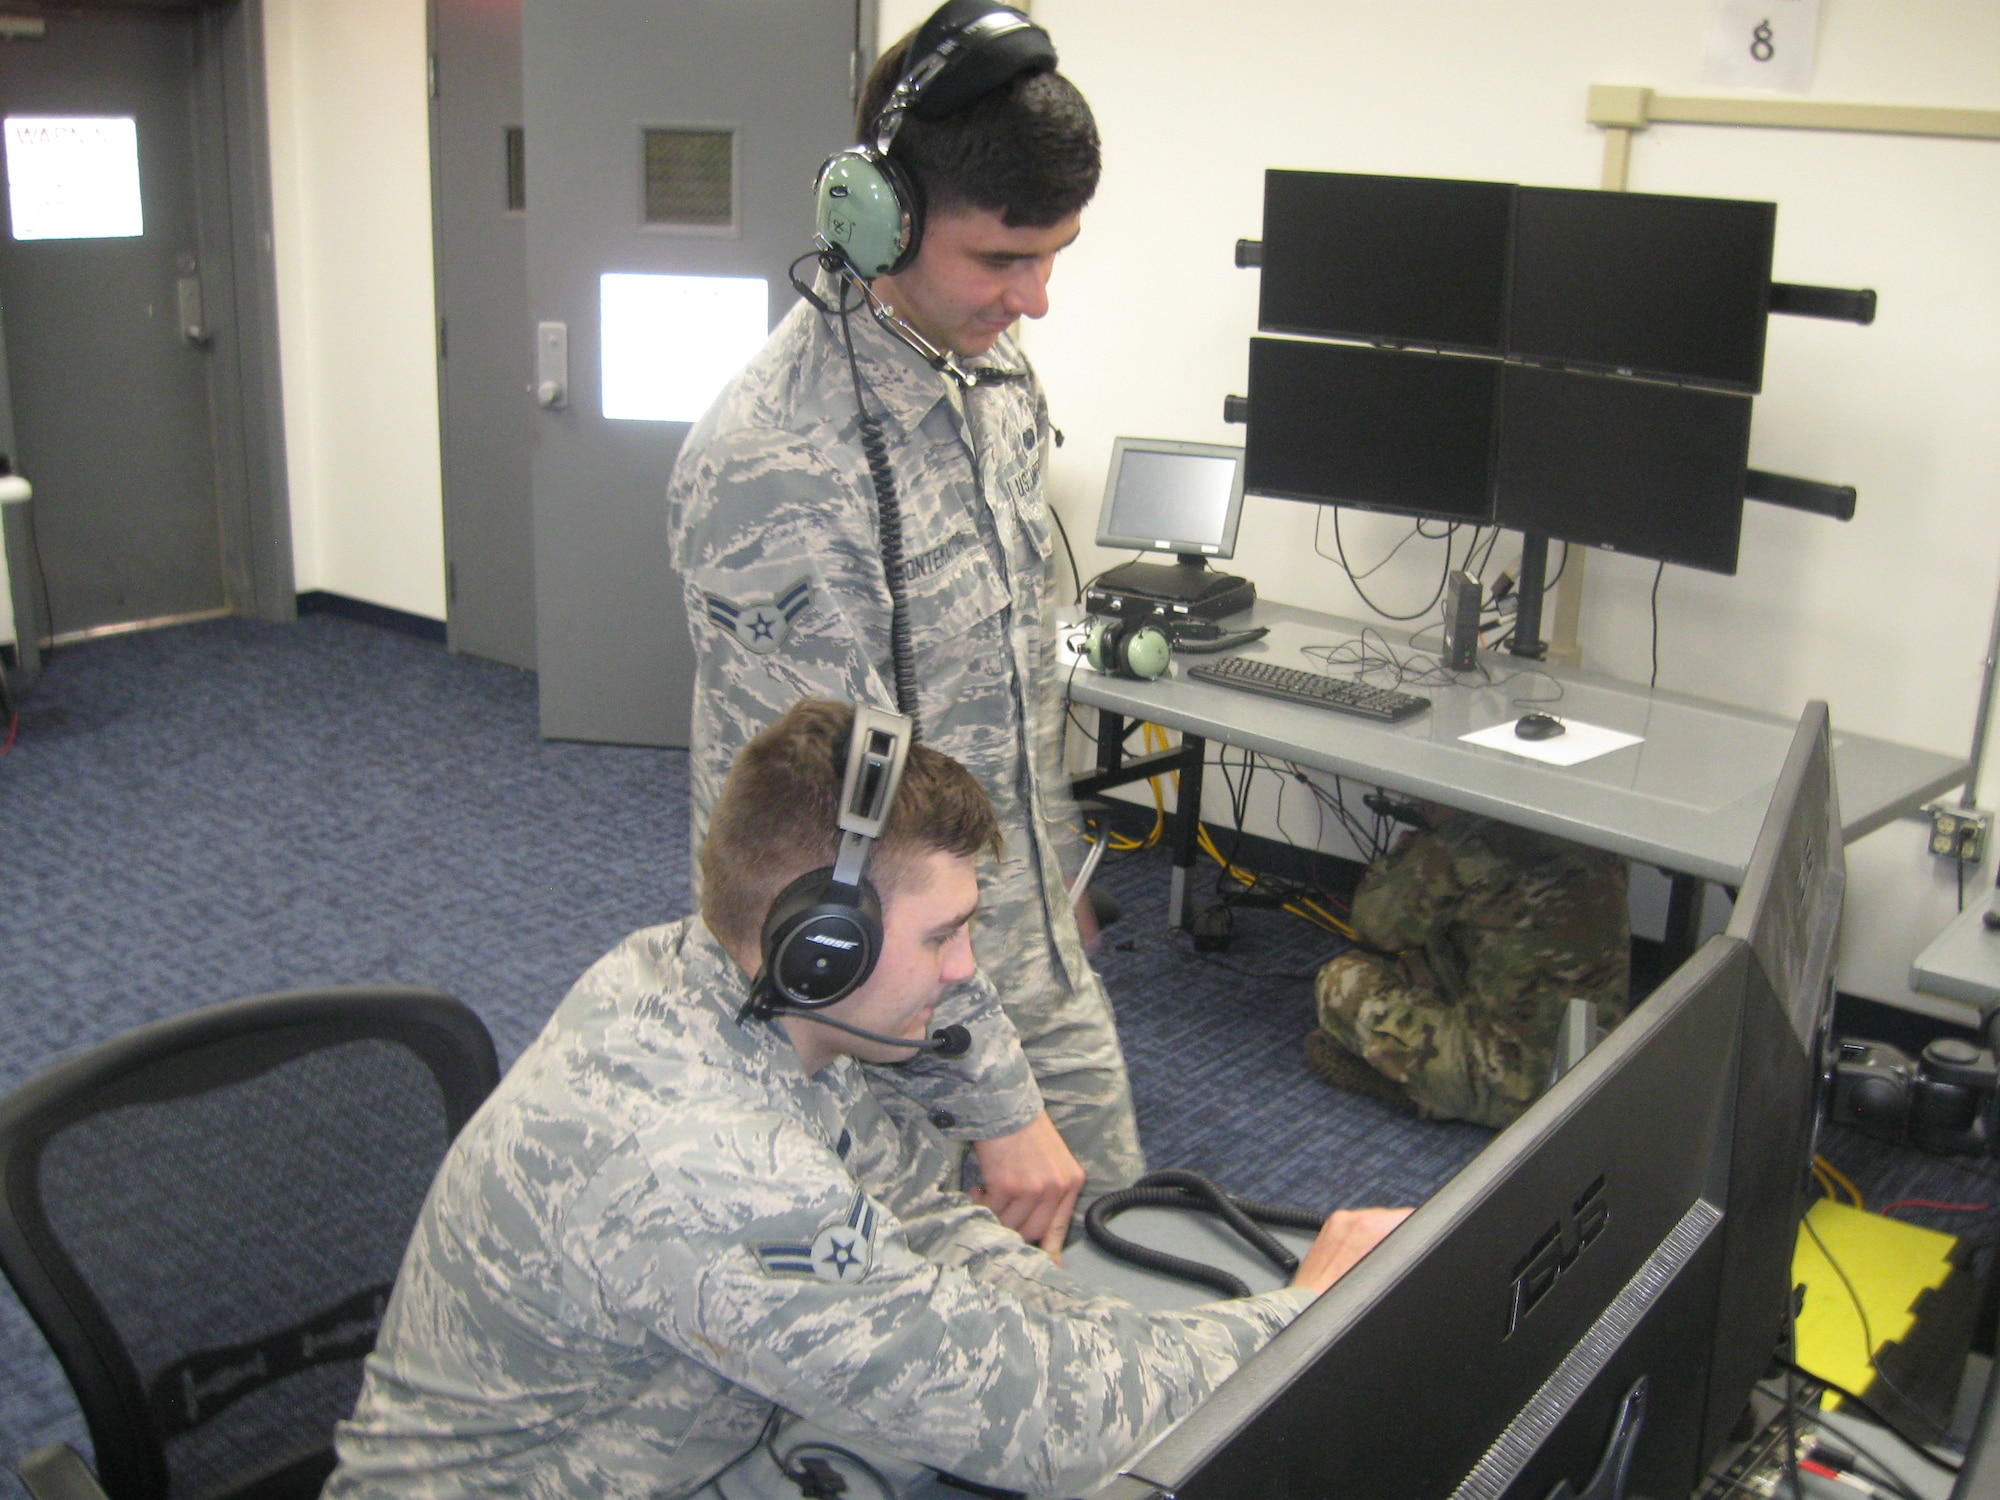 Airmen of the 752nd Operations Support Squadron complete their first live mission on the AN/TYQ-23A Tactical Air Operations Module weapons system in December 2019. The ground based weapons system allows squadron members at Tinker Air Force Base to provide command and control to both live and simulated aircraft from around the country.